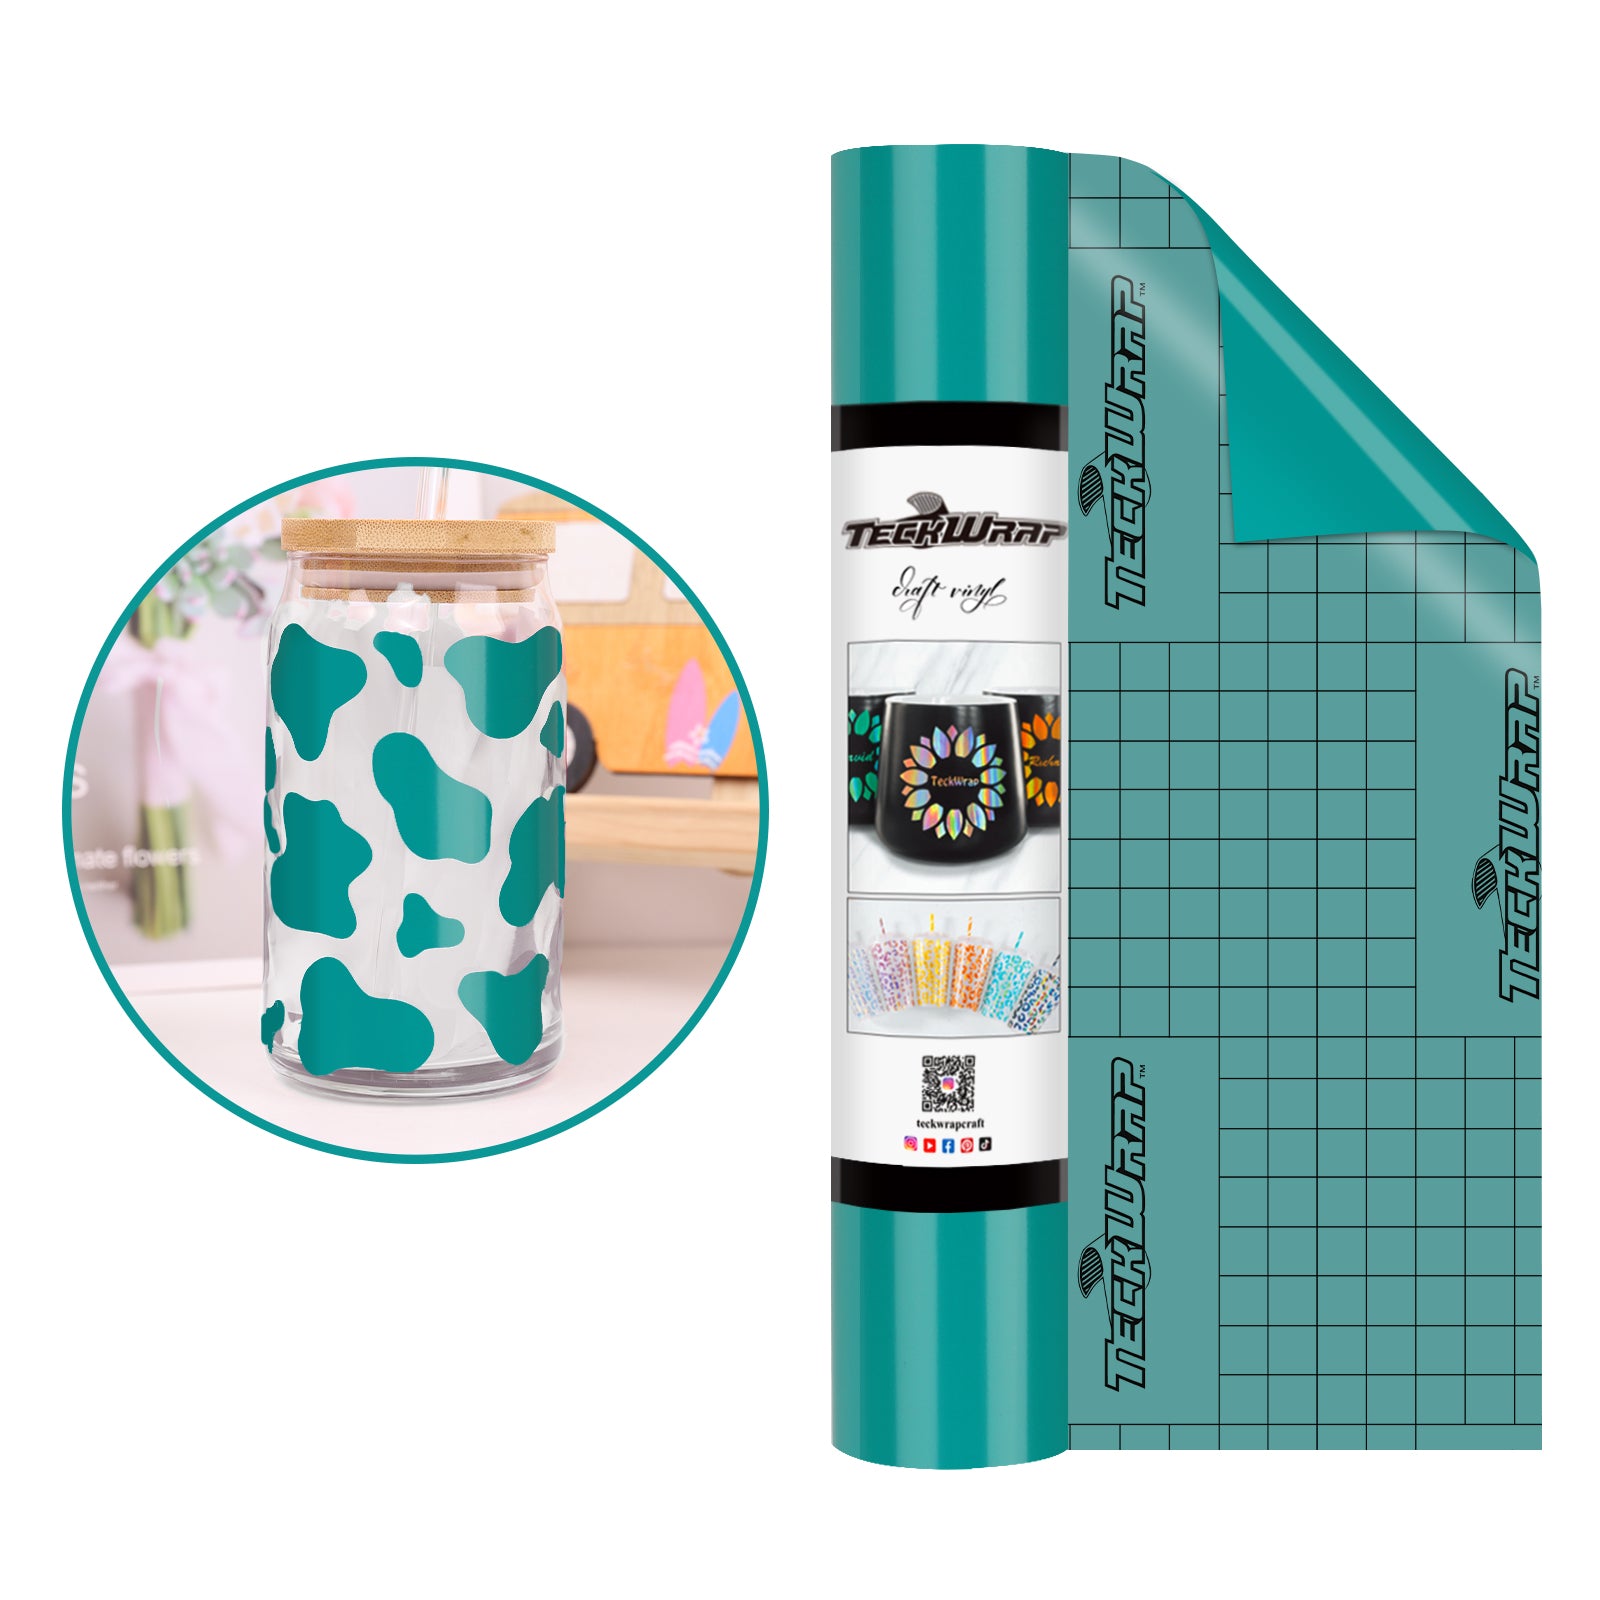 001 Economical Series Craft Vinyl - 10ft / Glossy Turquoise - TeckwrapCraft